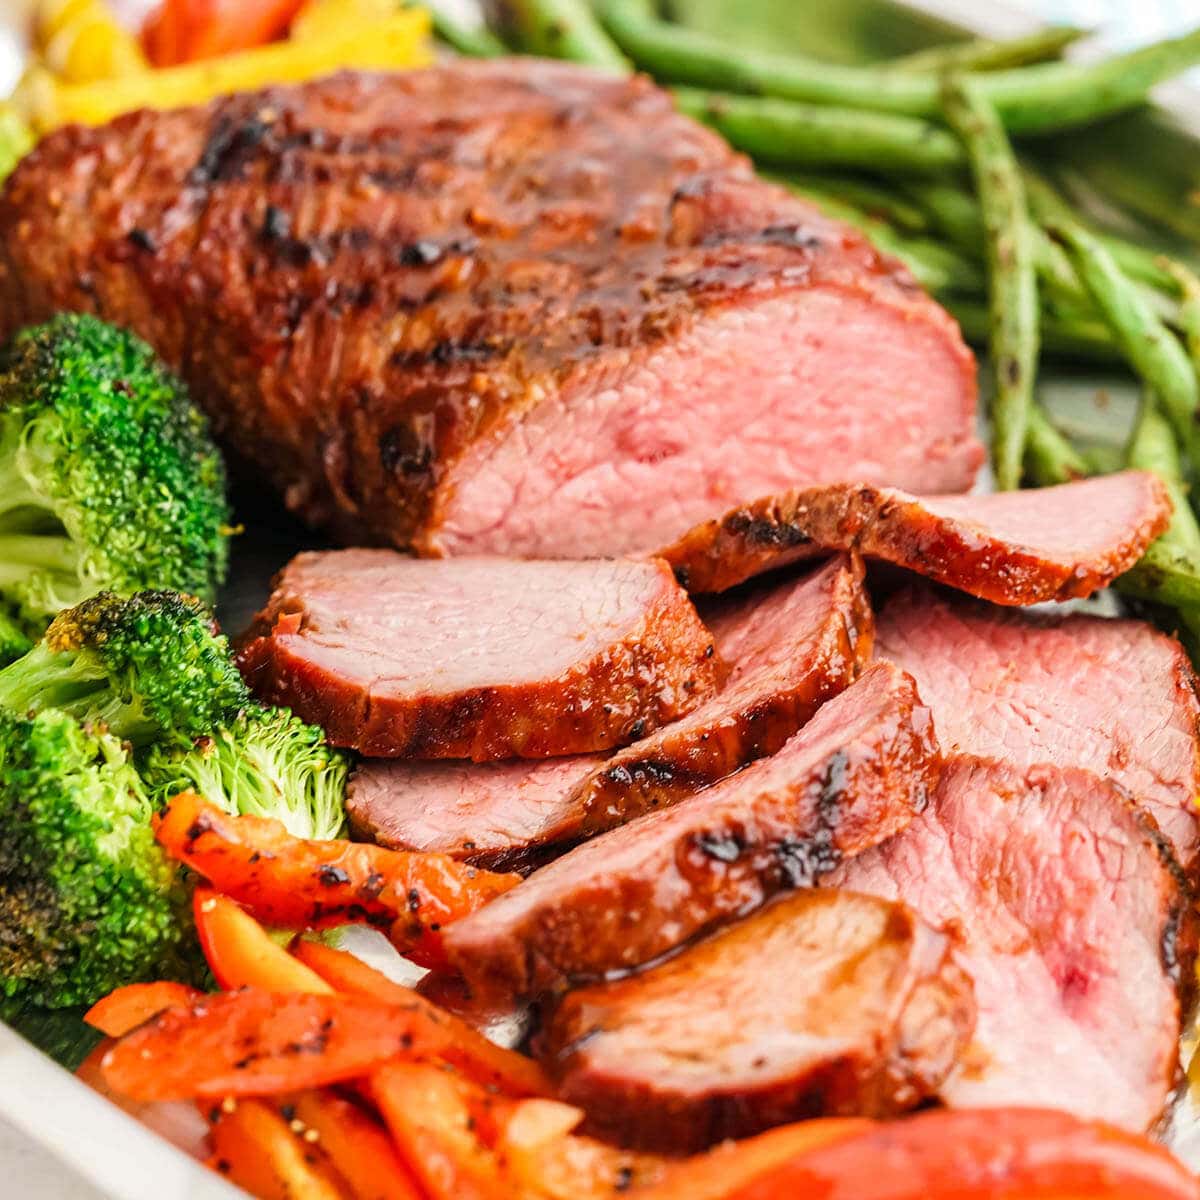 BBQ Tri Tip on platter surrounded by grilled veggies.